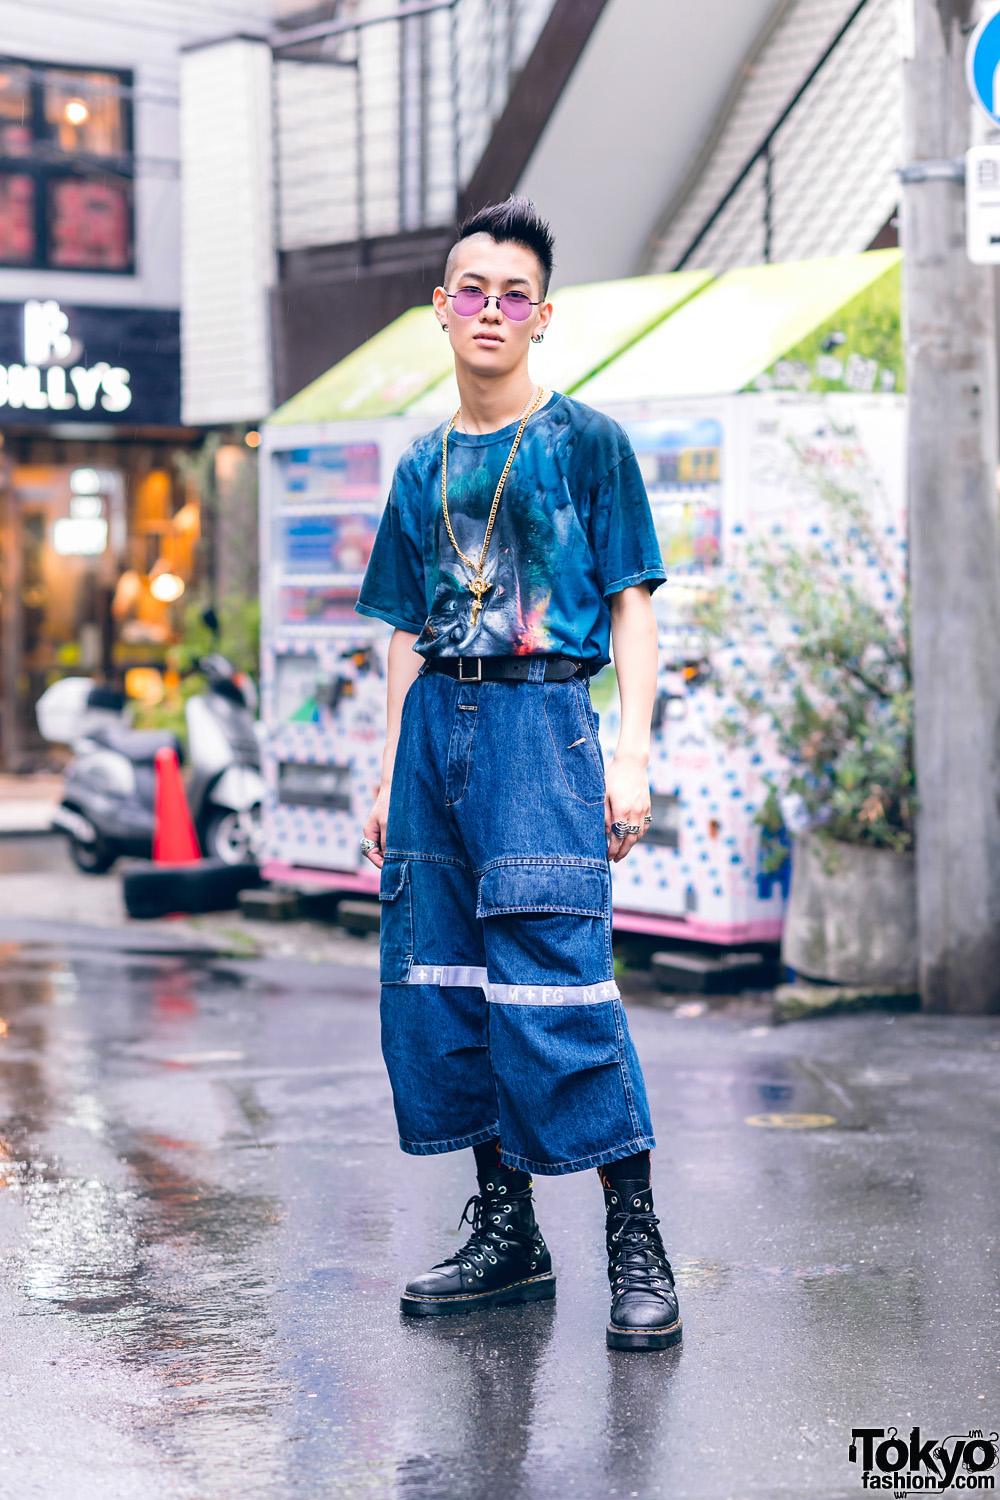 Casual Tokyo Street Style w/ Partially Shaved Hair, Tinted Glasses, Blingee Cross Necklace, Graphic Shirt, Marithe + Francois Girbaud, Dog Harajuku, Nacht & Dr. Martens Grommet Boots